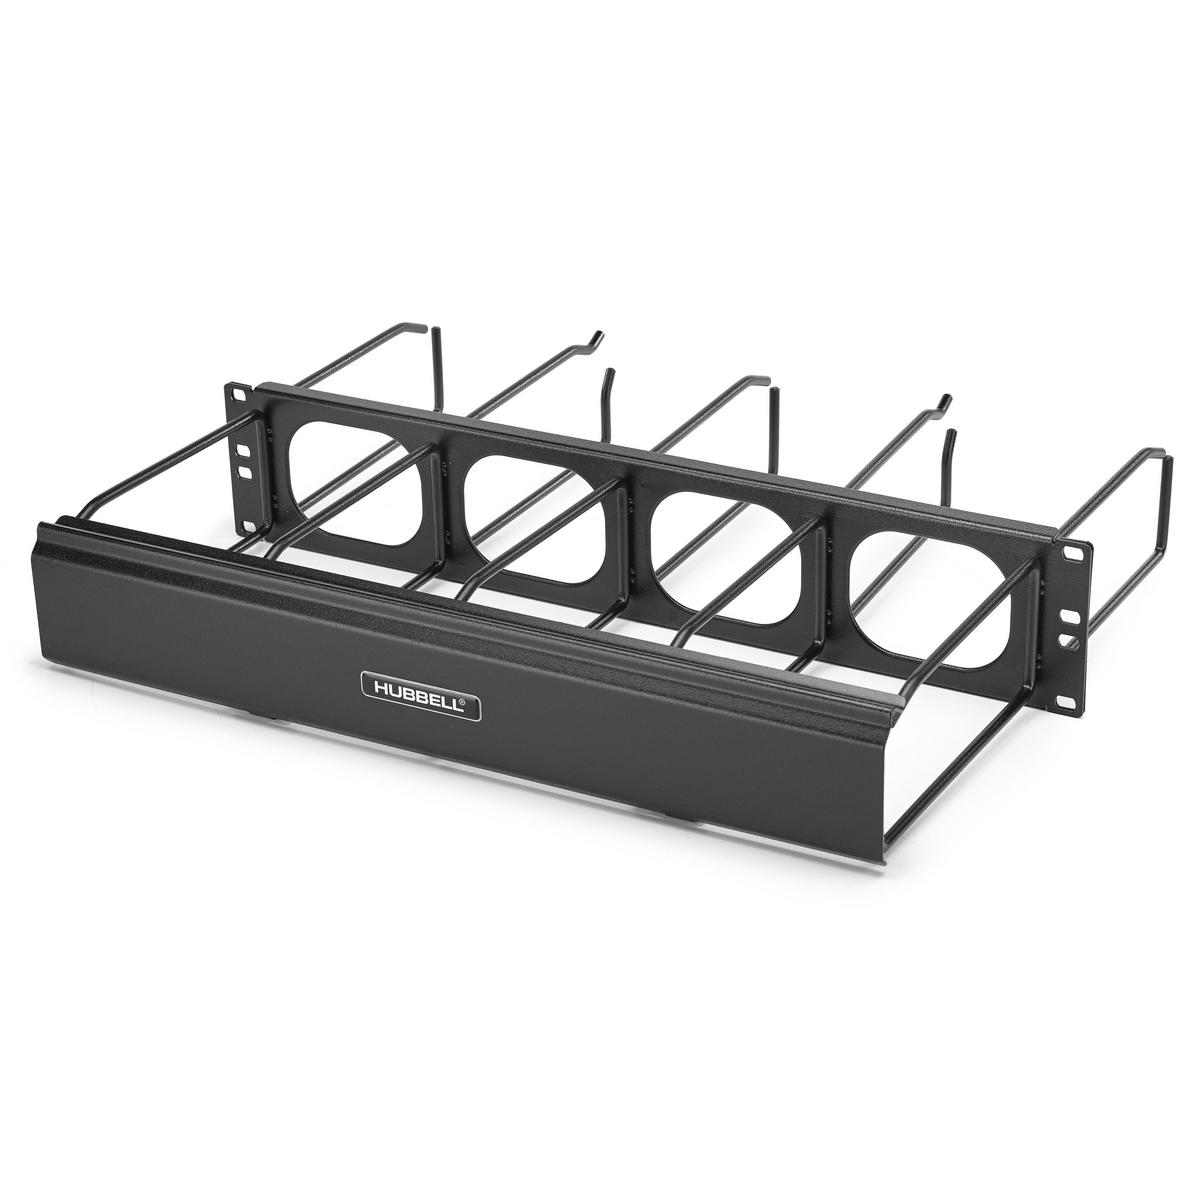 Hubbell HM147C Hubbell Premise Wiring Products, Horizontal Cable Management, M-Series, 1-Unit, 4" Front Extension, 7" Rear Extension, With Cover, Black  ; Double Sided